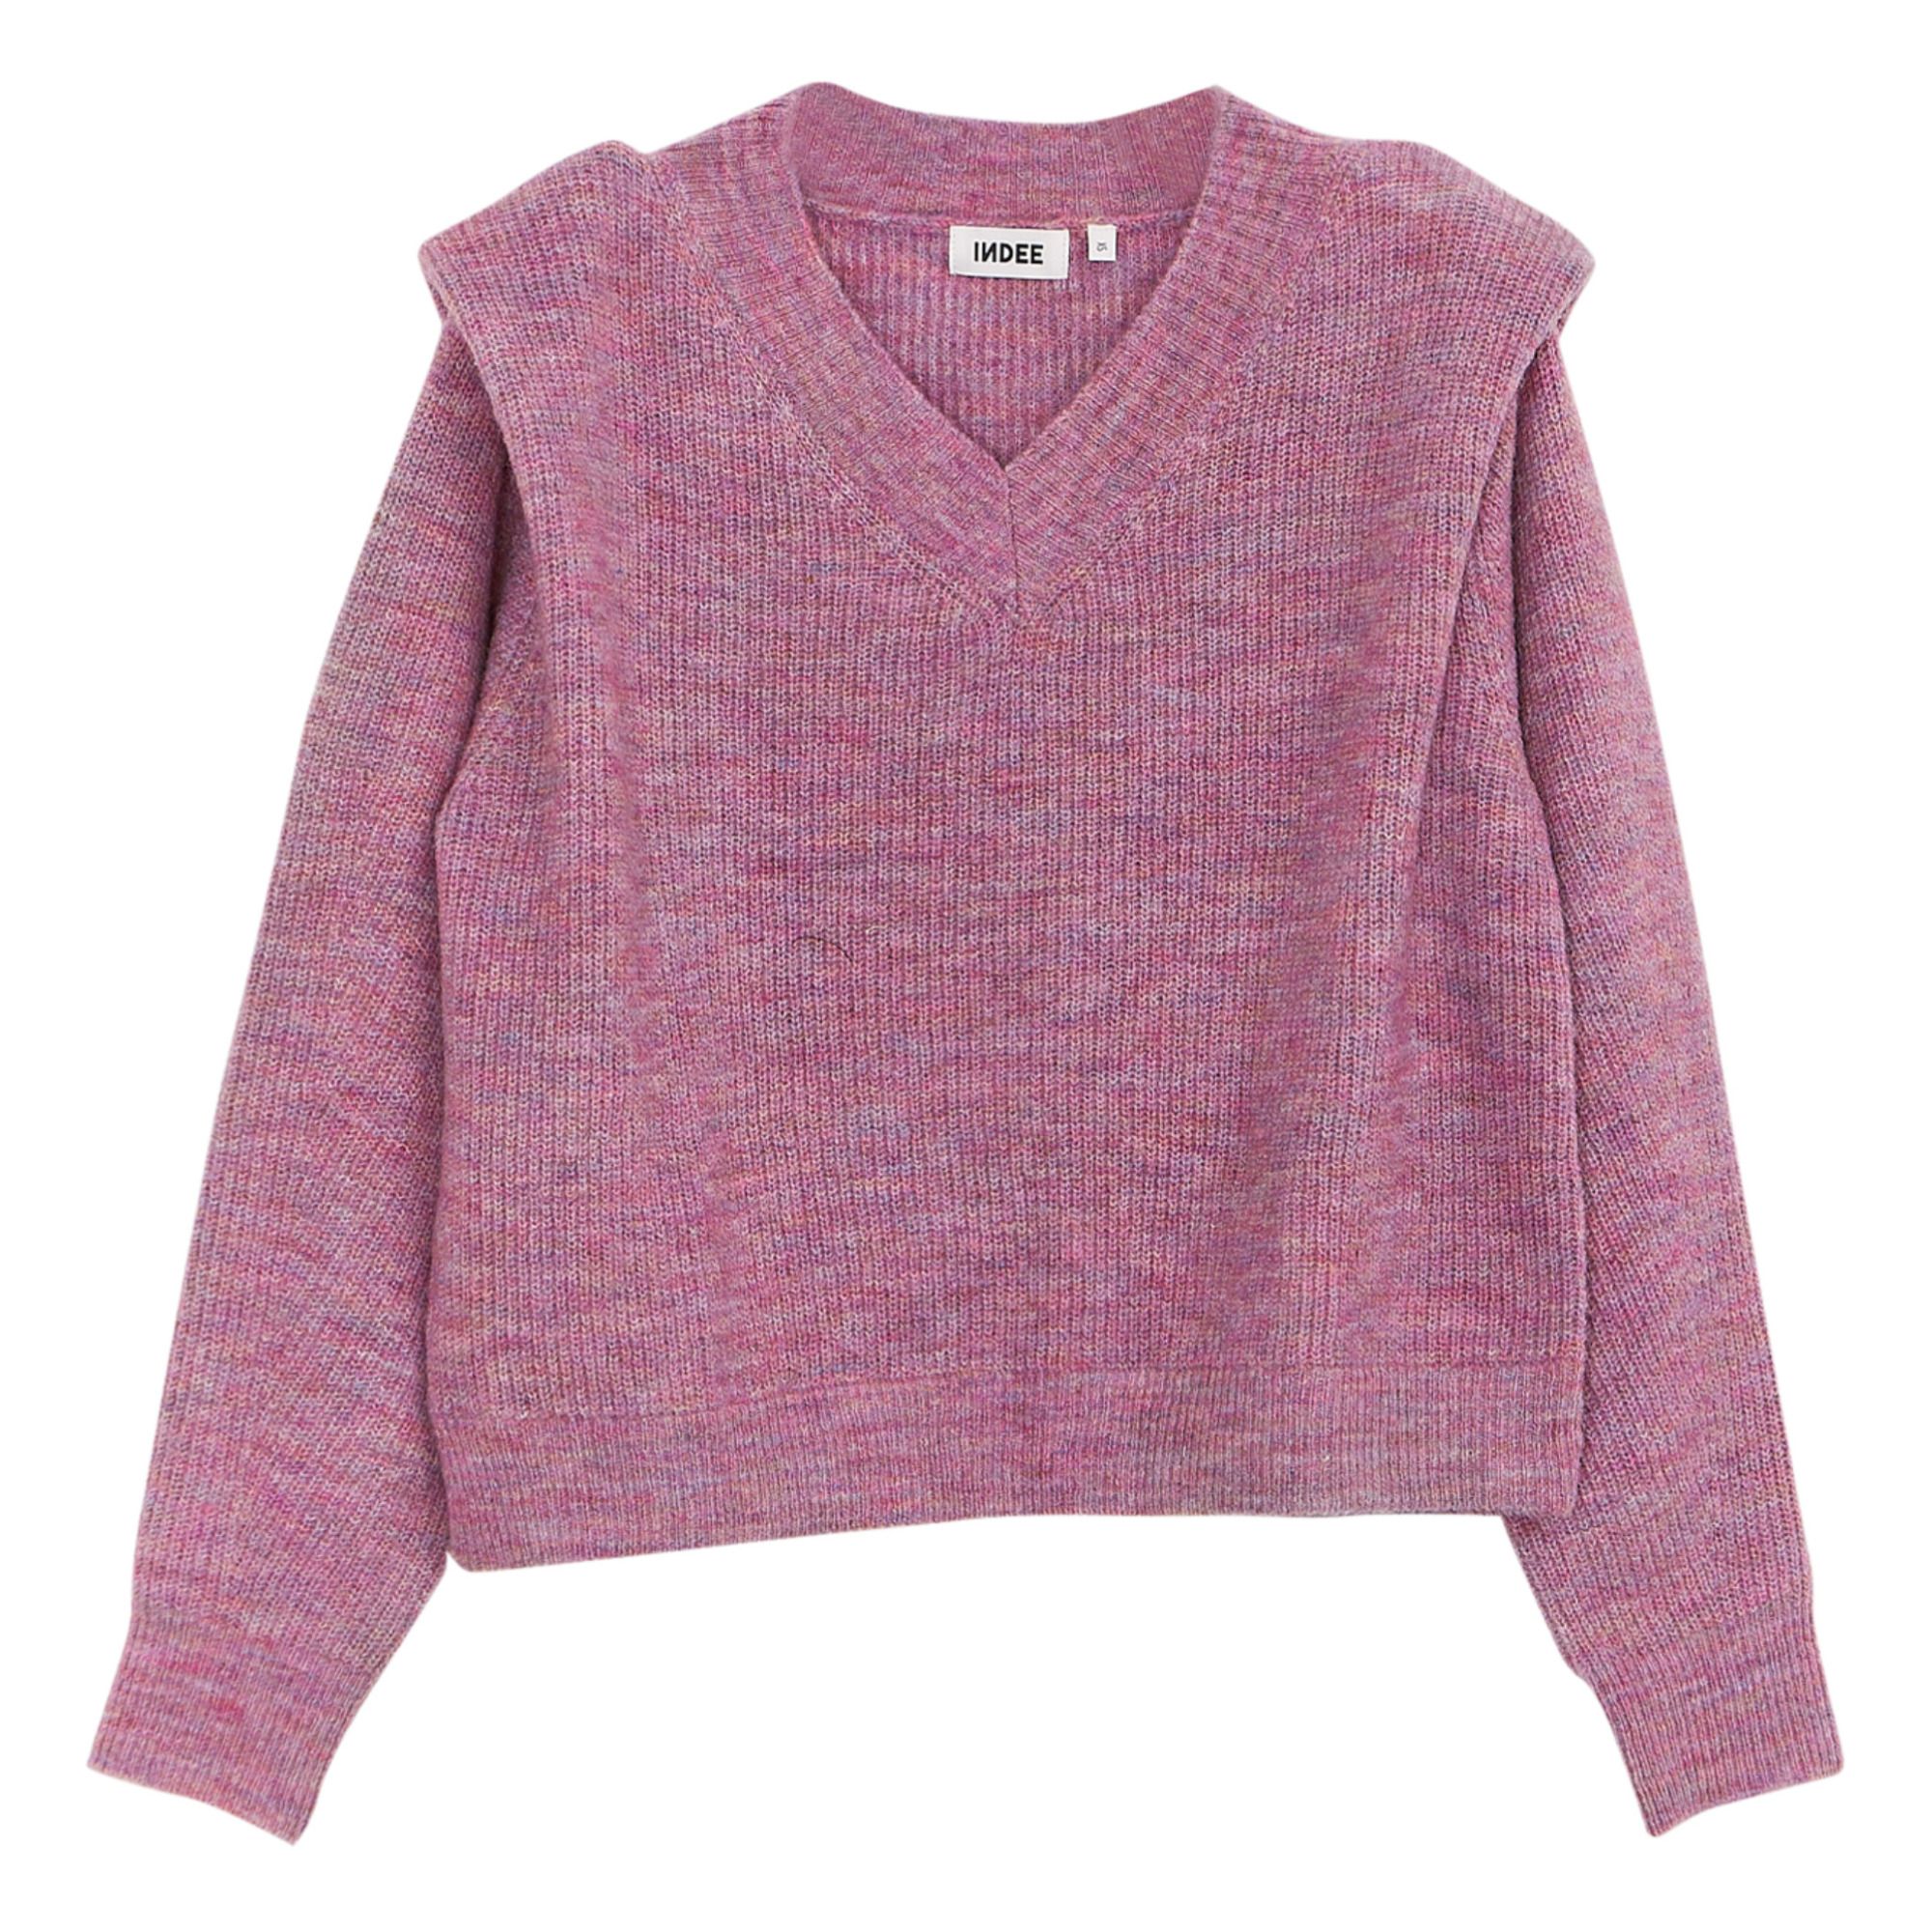 Indee - Pull Karaoke Mohair - Fille - Lilas